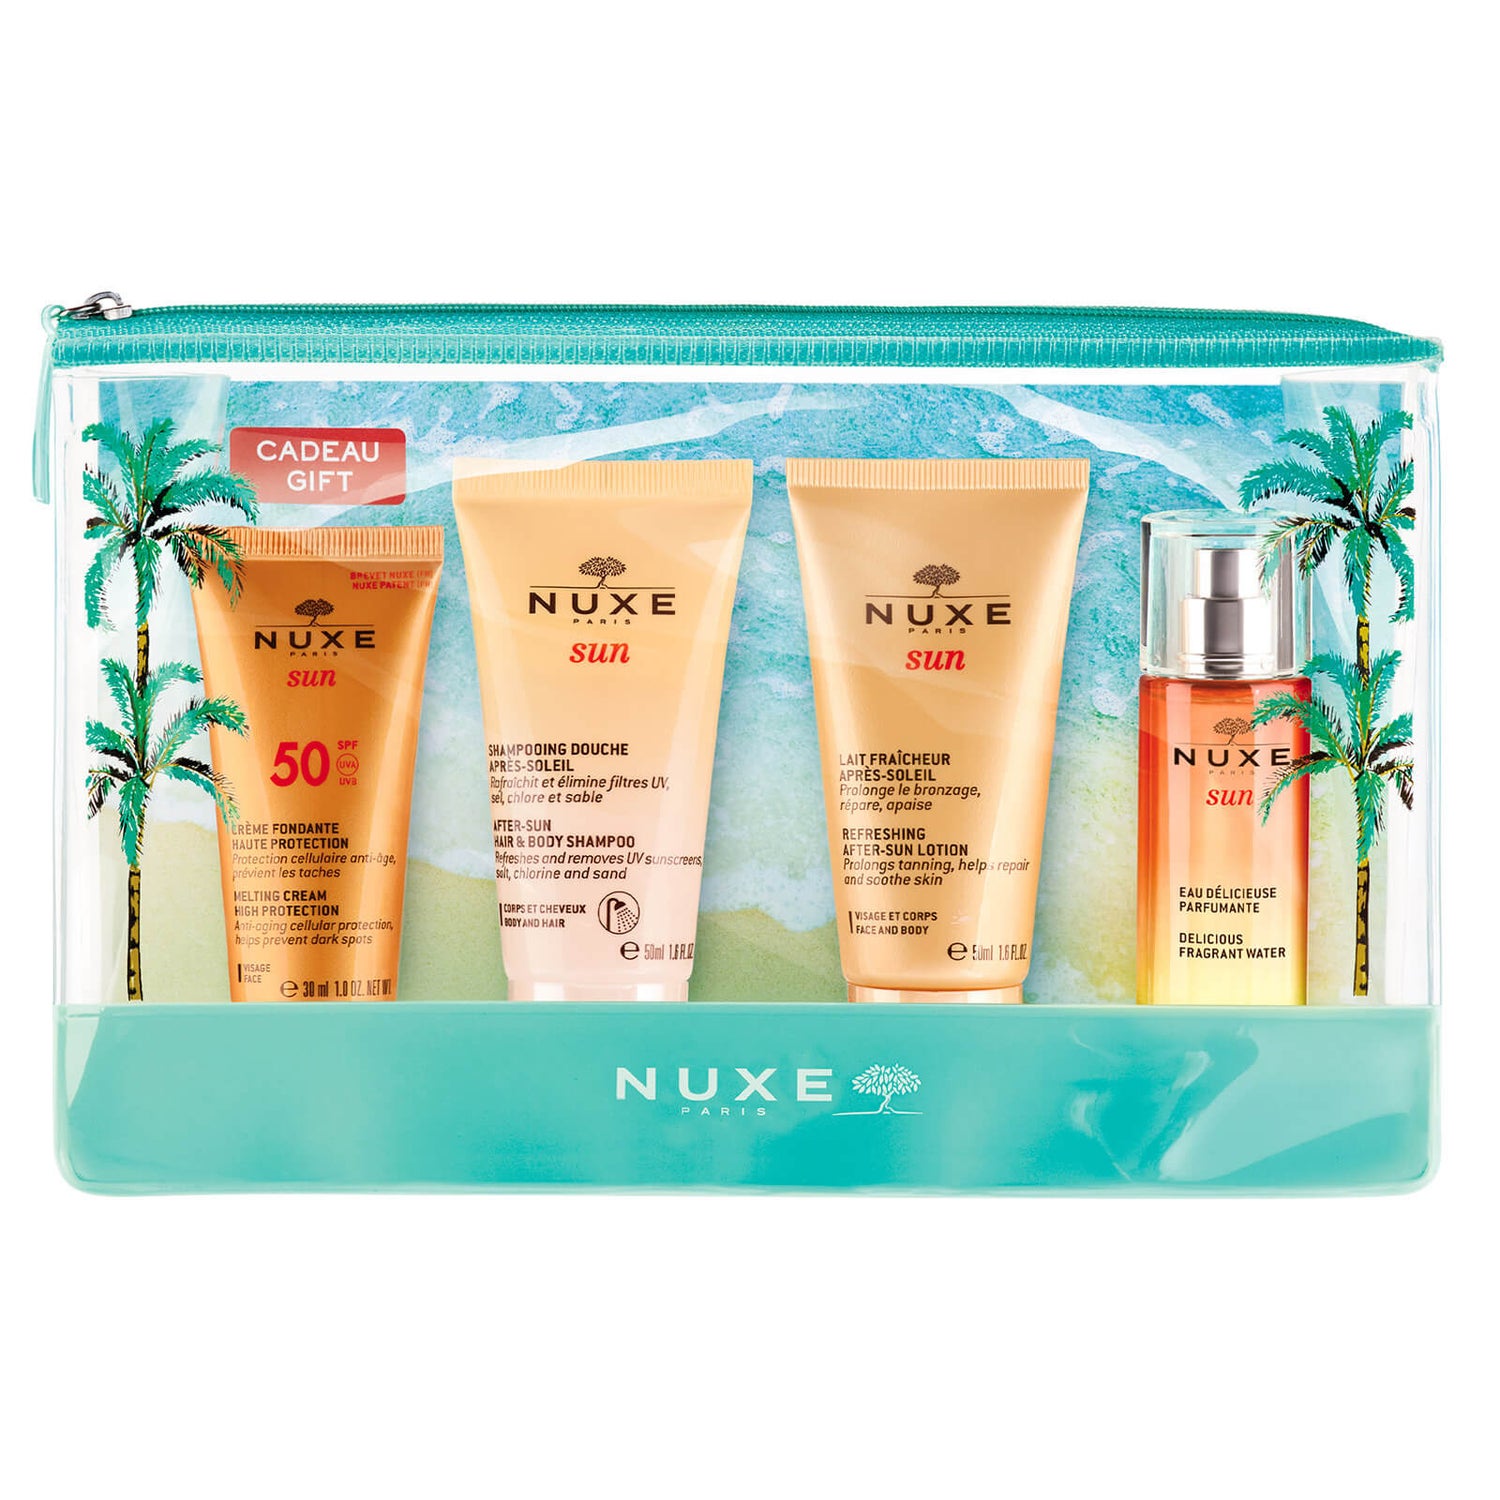 NUXE Sun Exclusive Travel Pouch